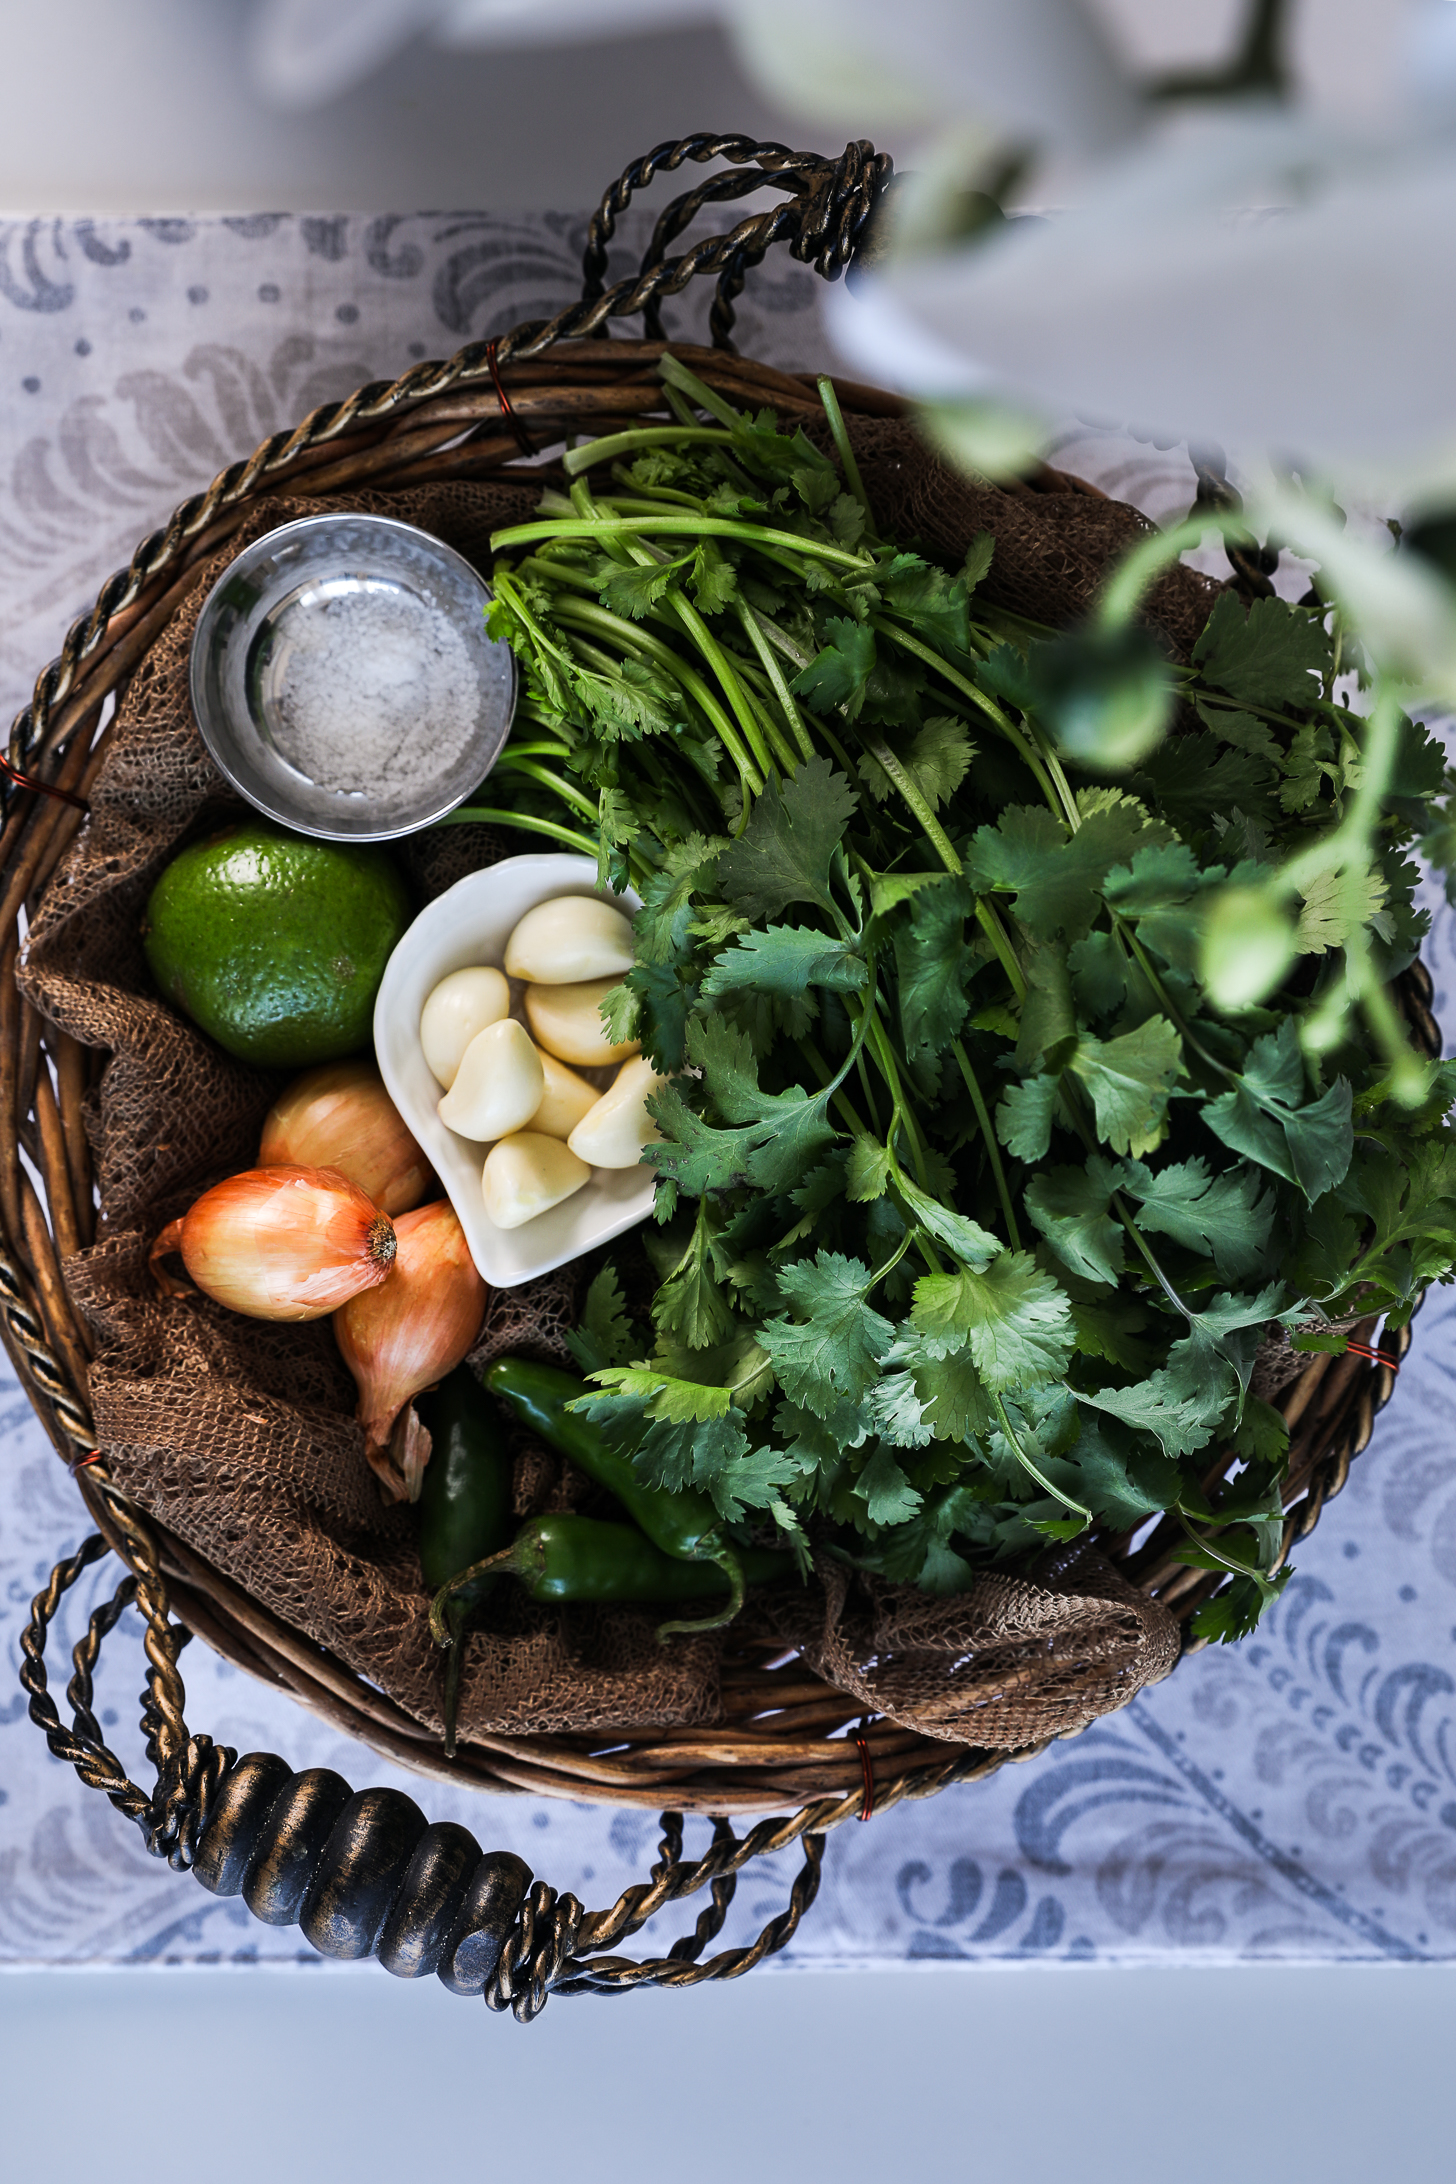 Top view image of a basket of food ingredients including fresh cilantro, garlic, shallots, lime, chillies and salt.